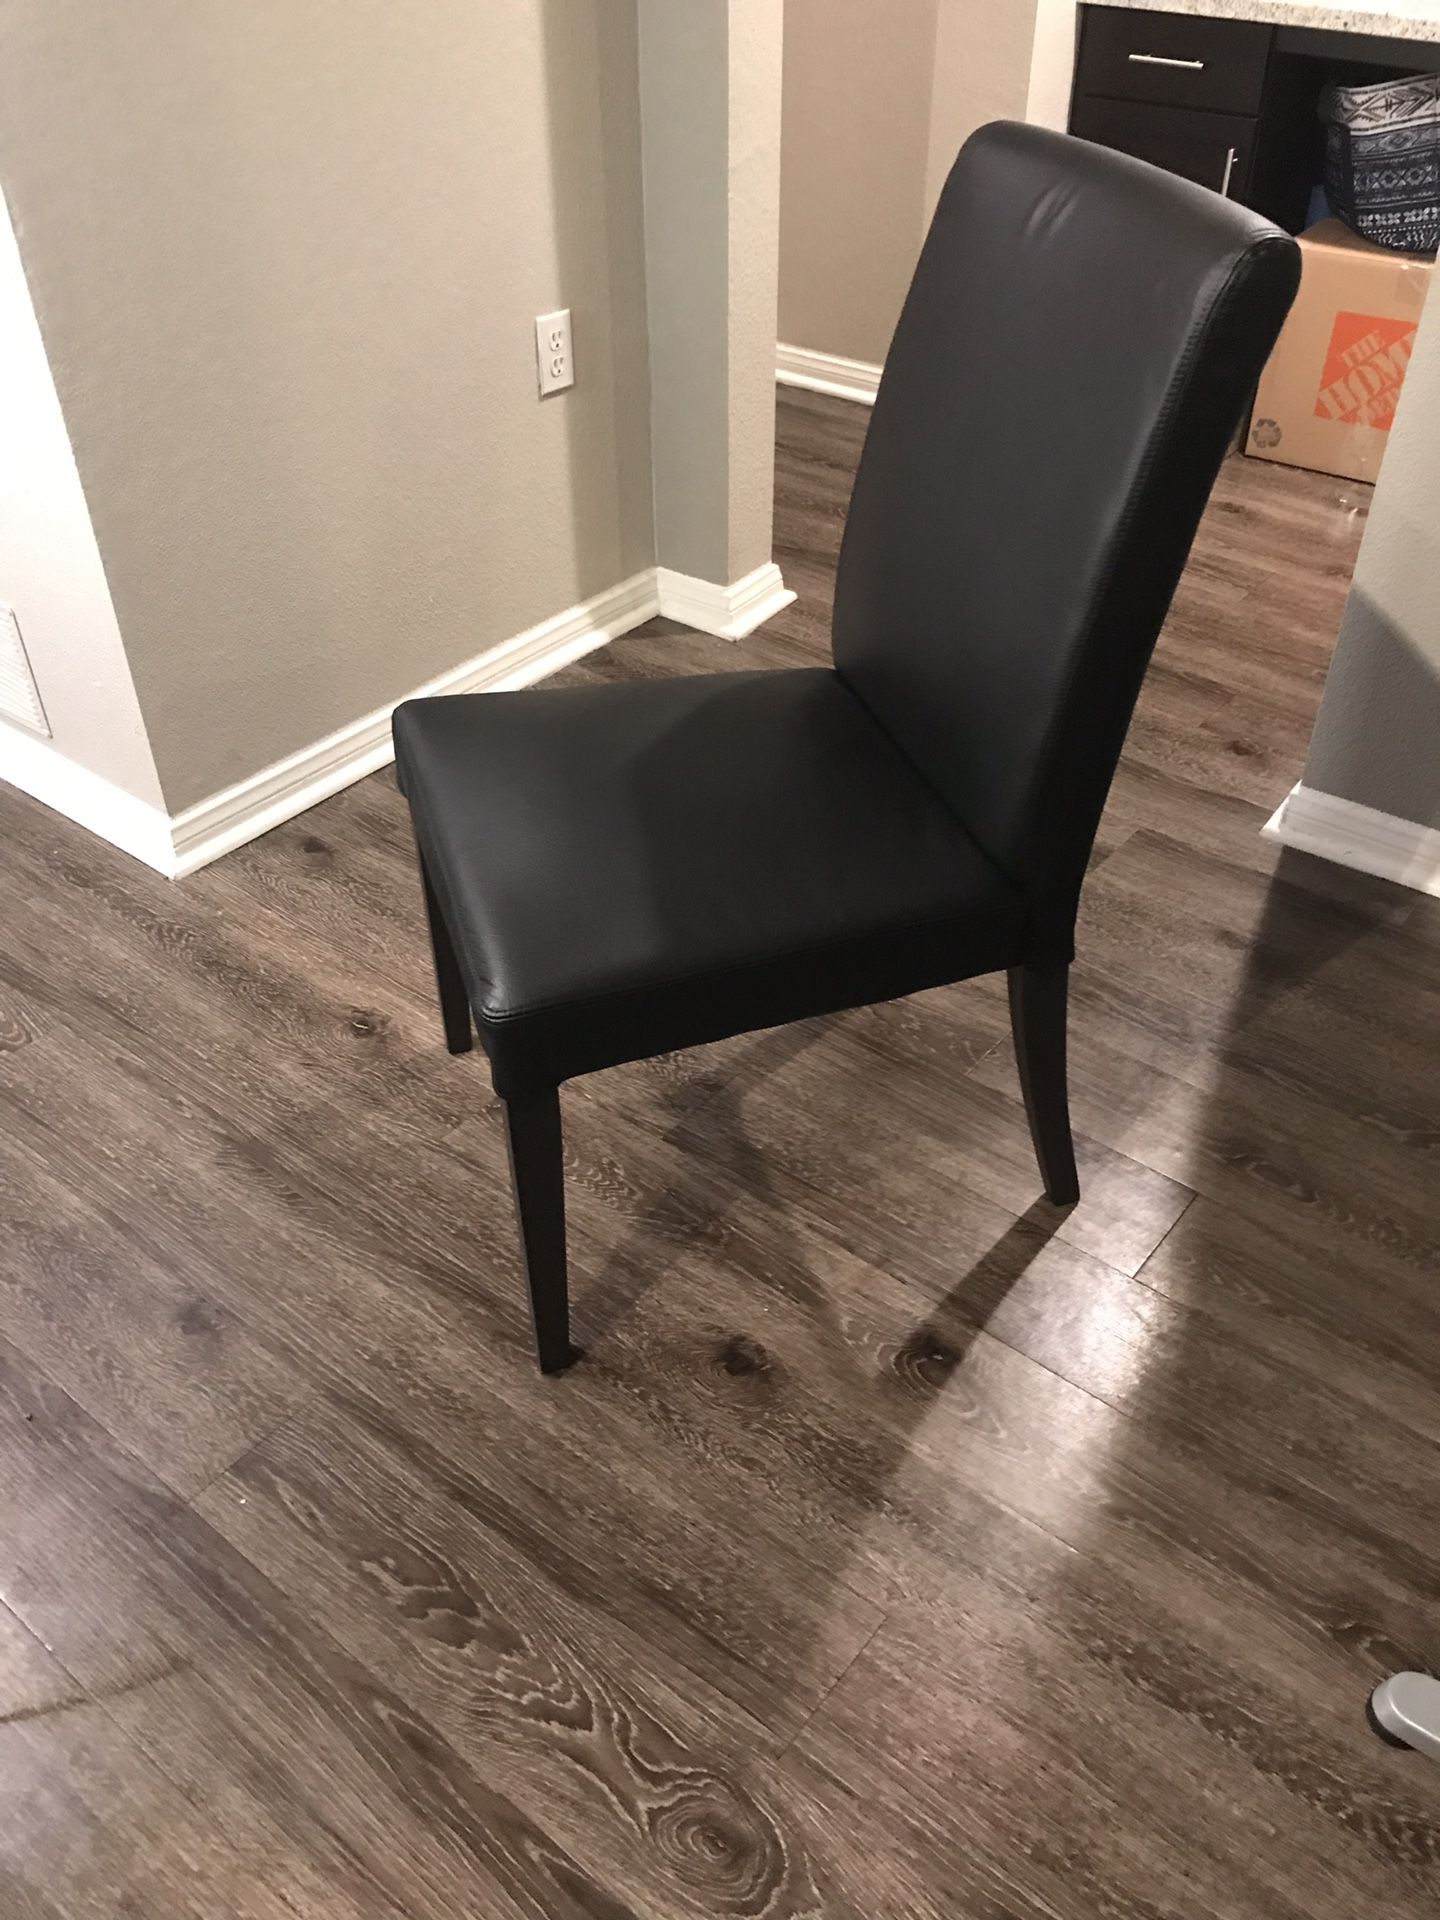 PAIR of IKEA HENRIKSDAL leather dining chairs